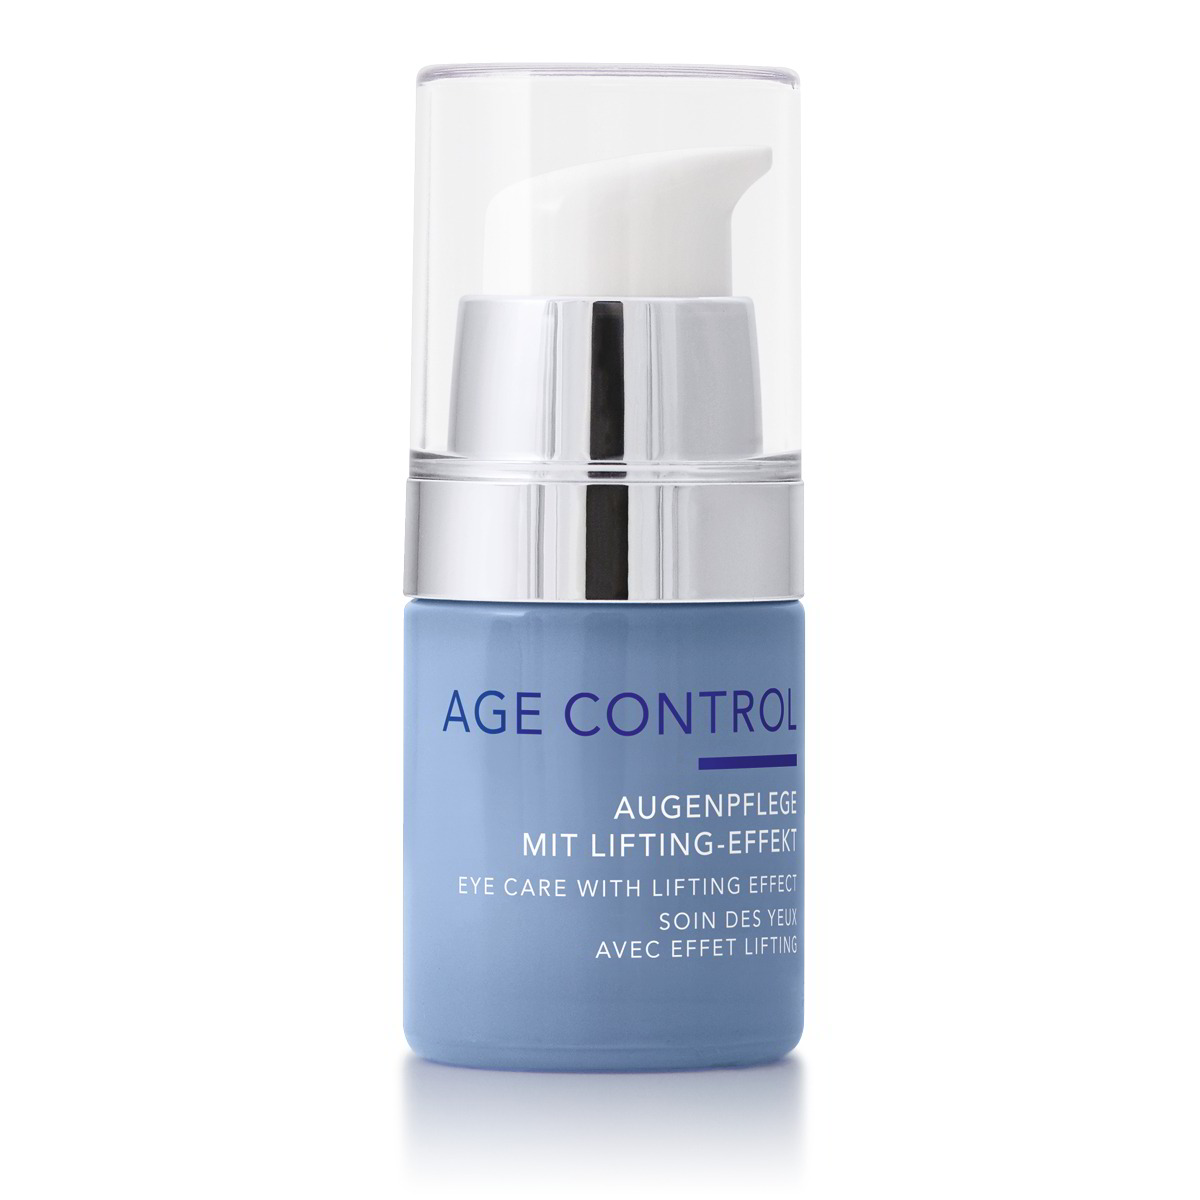 Age Control Eye Care With Lifting Effect